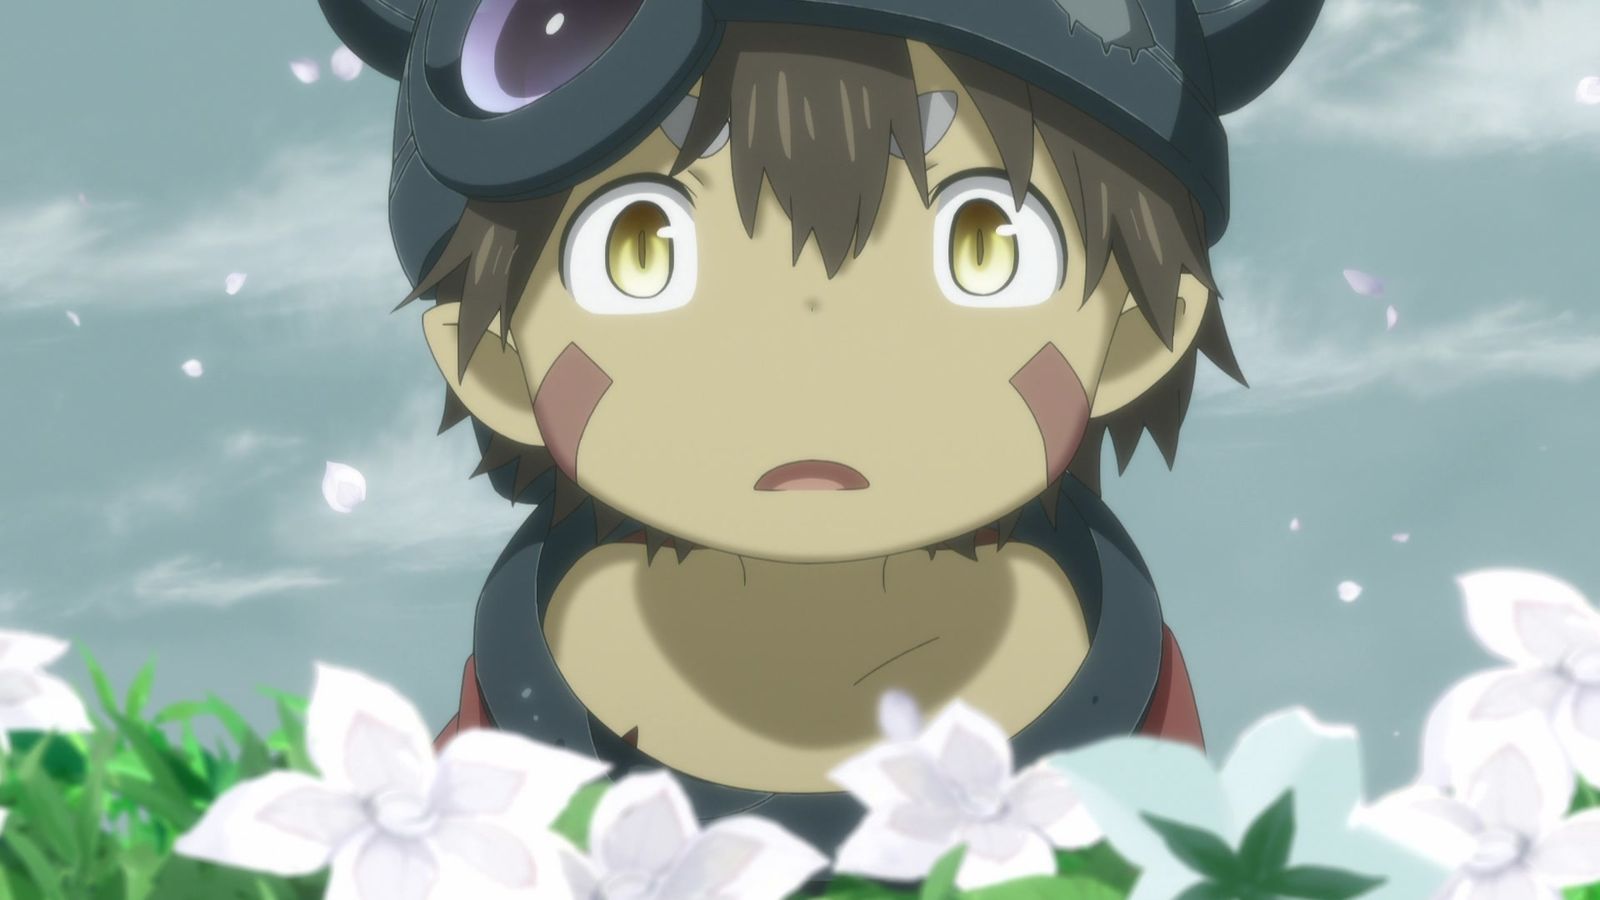 Who Created Reg in Made in Abyss?